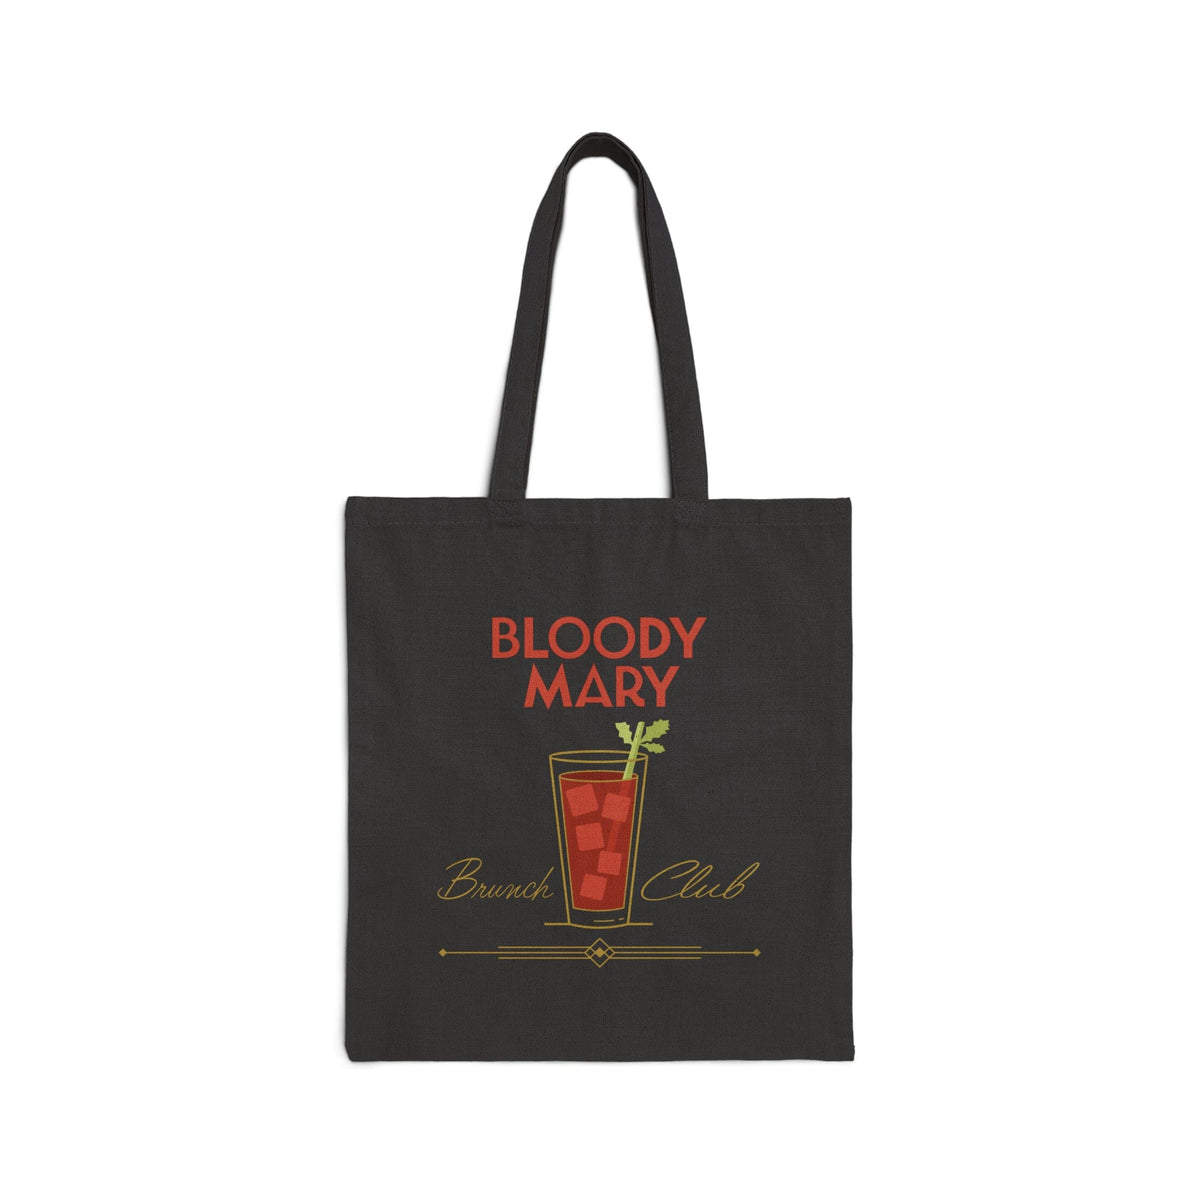 Bloody Mary Brunch Club Canvas Tote Bag | Girls Day | Party Favors | Brunching so hard Bags TheFringeCultureCollective